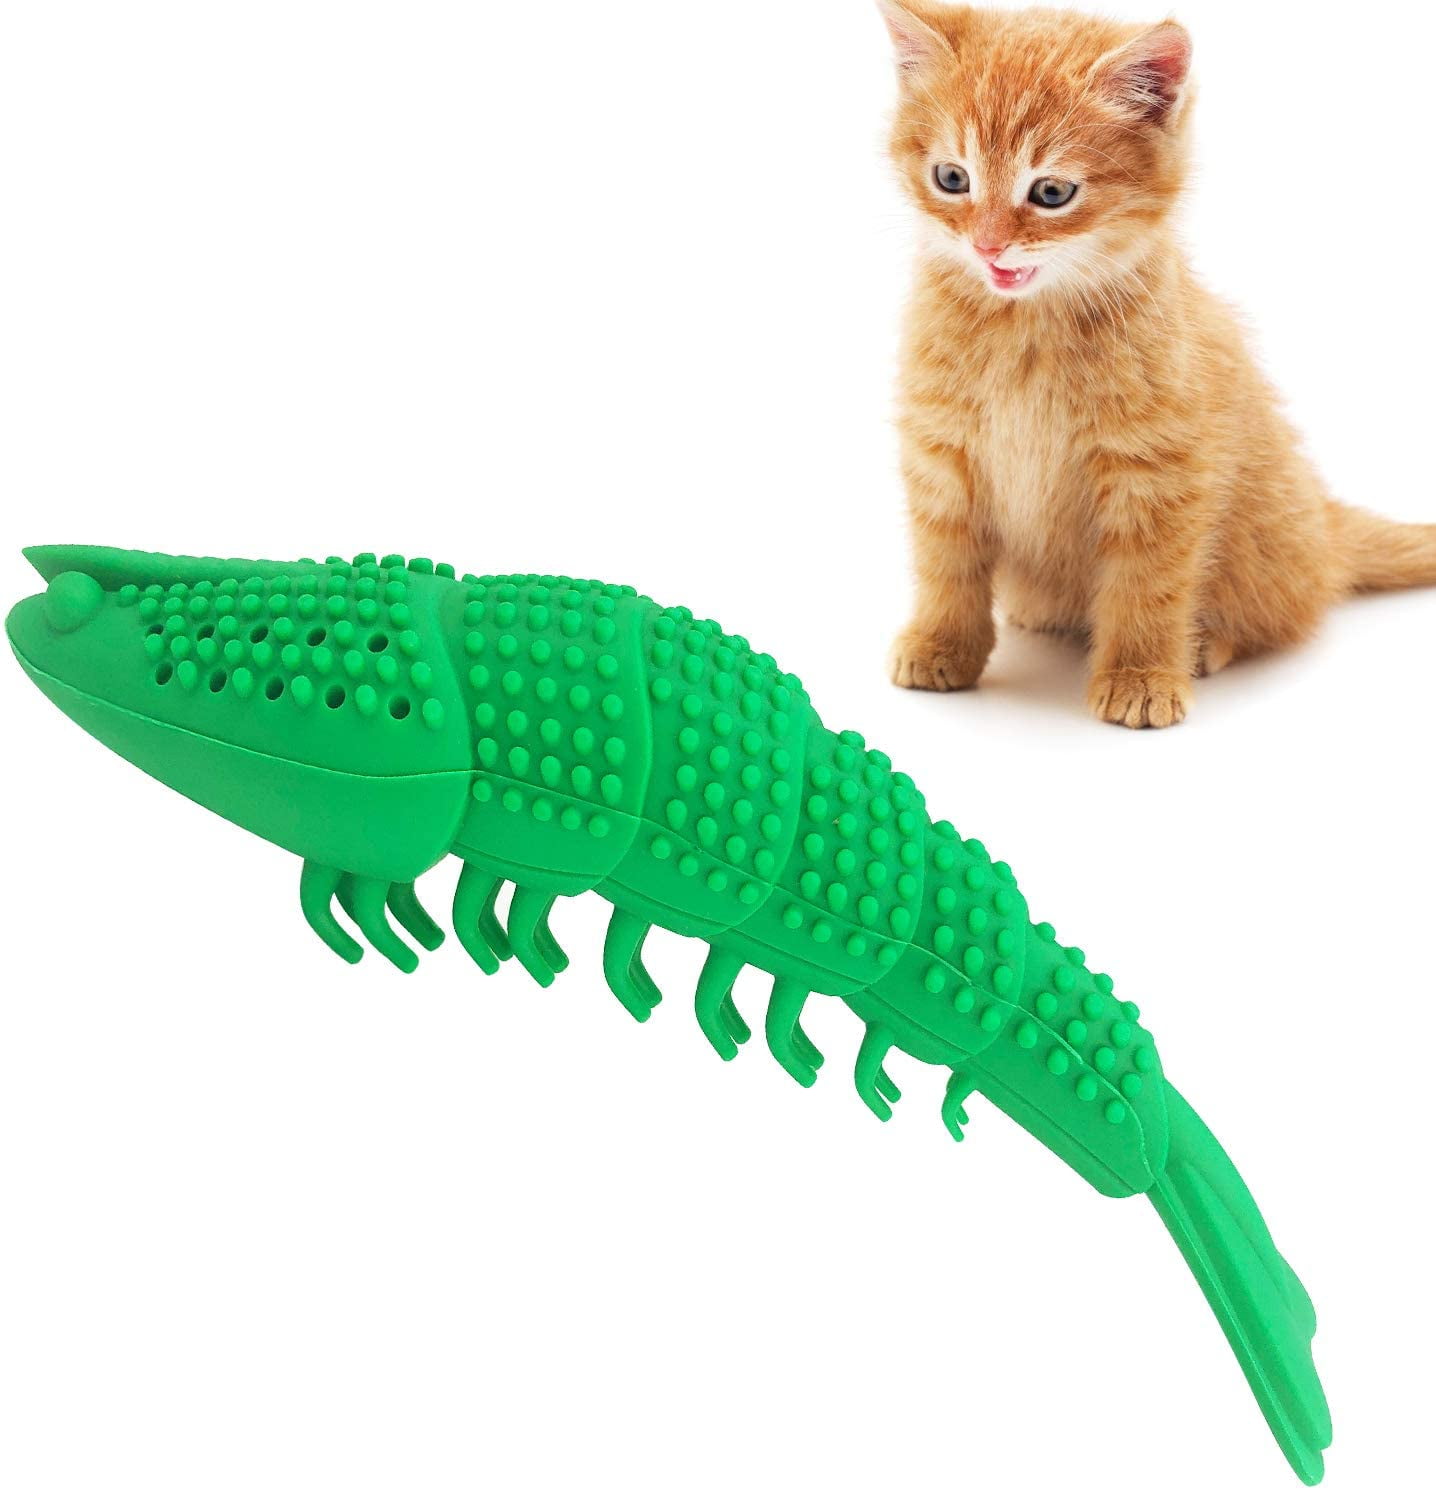 HETOO Cat Toys,Interactive Cat Toothbrush Catnip Chew Treat Toy for Kitten Kitty Cats Teeth Cleaning Dental Care,Crayfish Shape Pet Toy Cat with Bell 